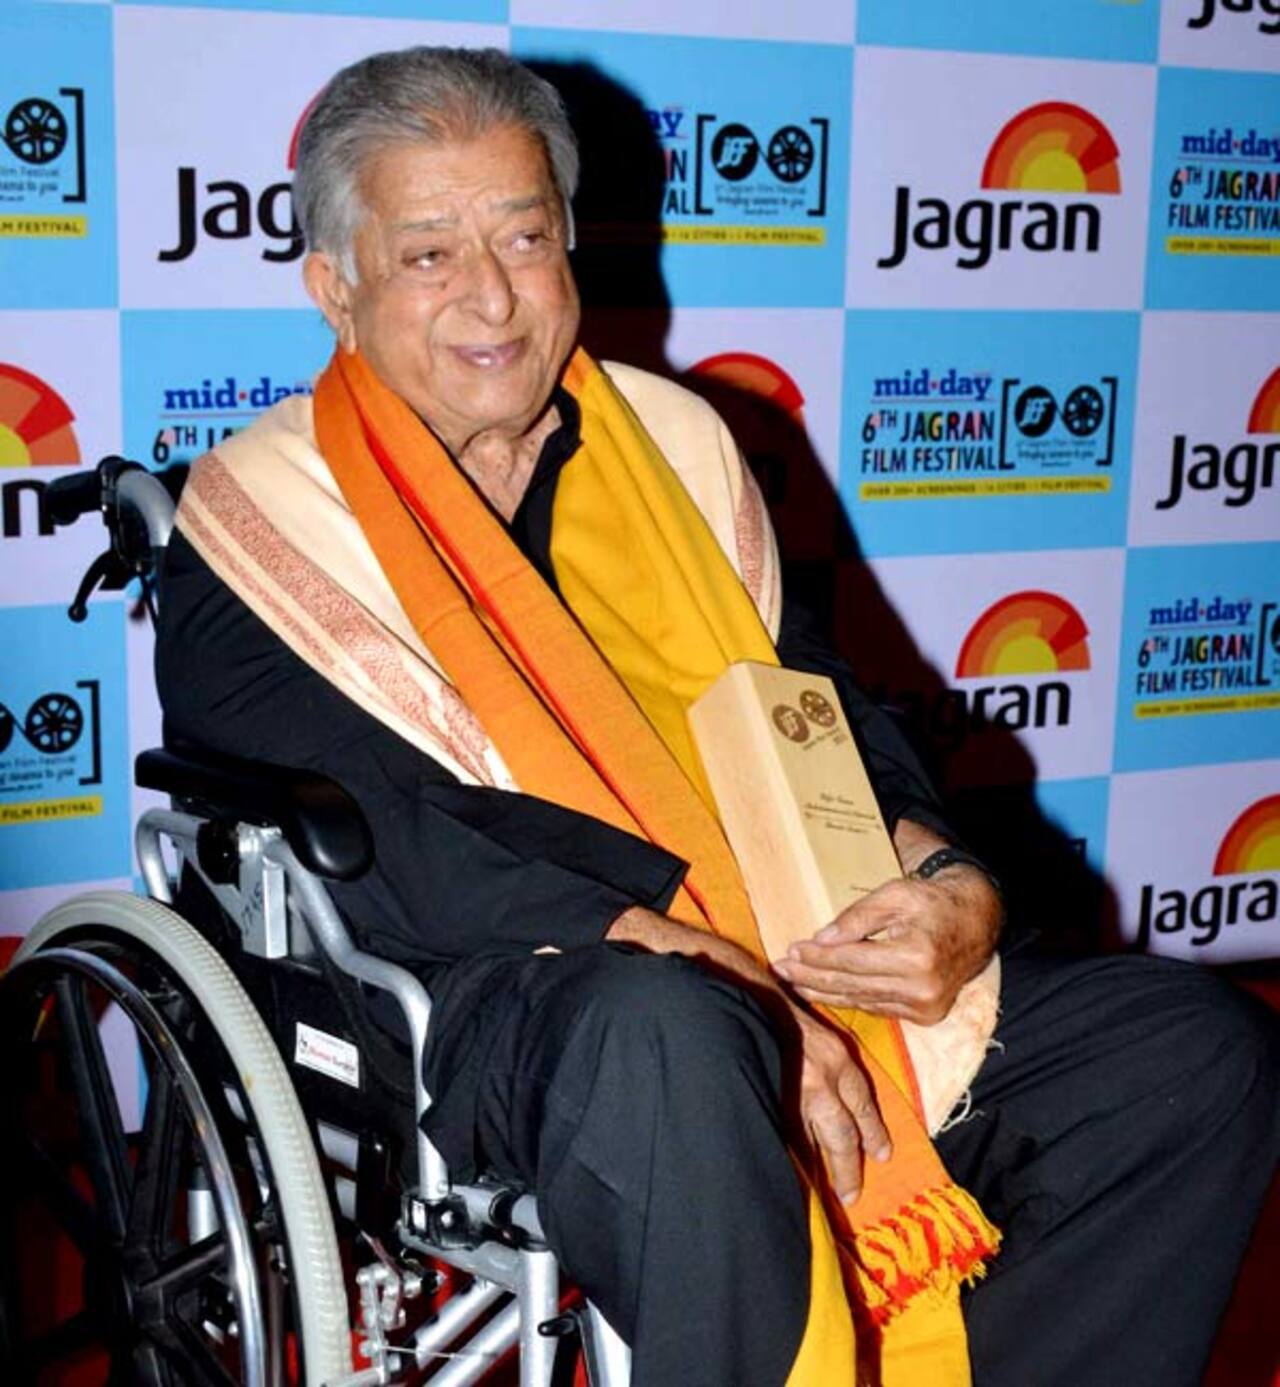 Shashi Kapoor honoured with Life Time Achievement Award at Jagran Film Festival